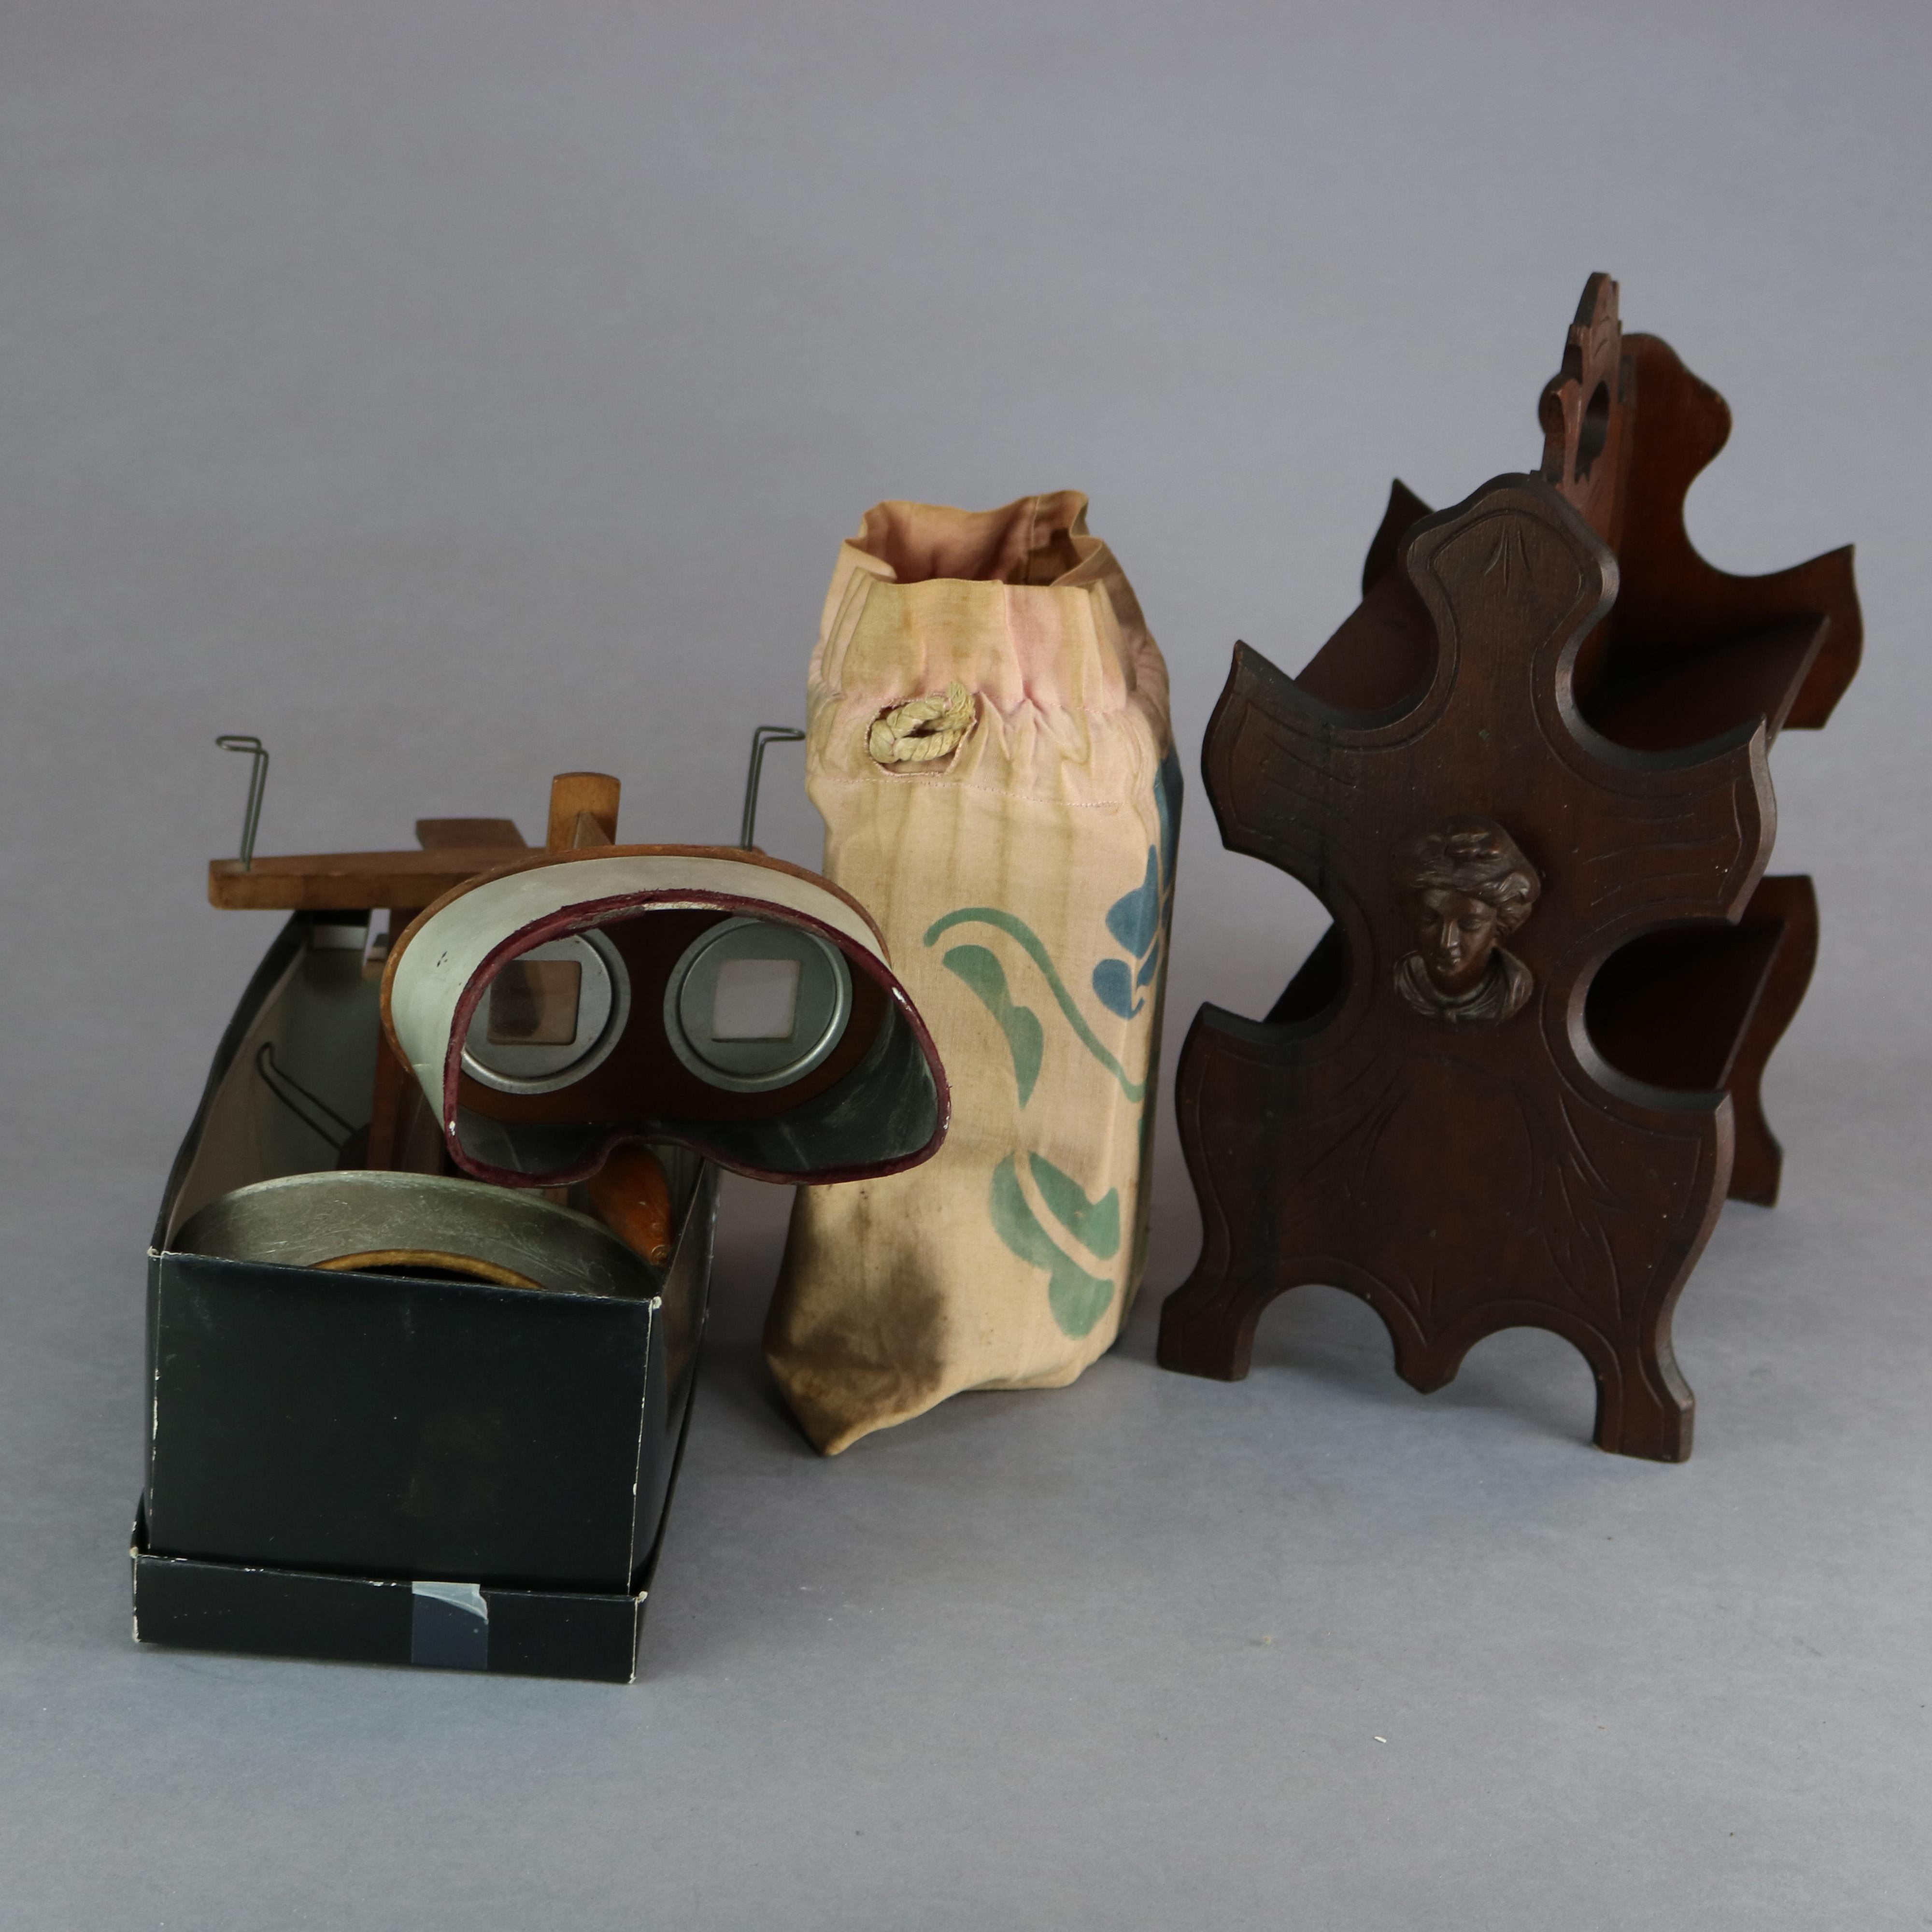 An antique stereo viewer set by Underwood & Underwood includes two viewers (one with logo), cards and walnut stand with carved Jenny Lind mask on shaped sides, c1890

Measures: 13